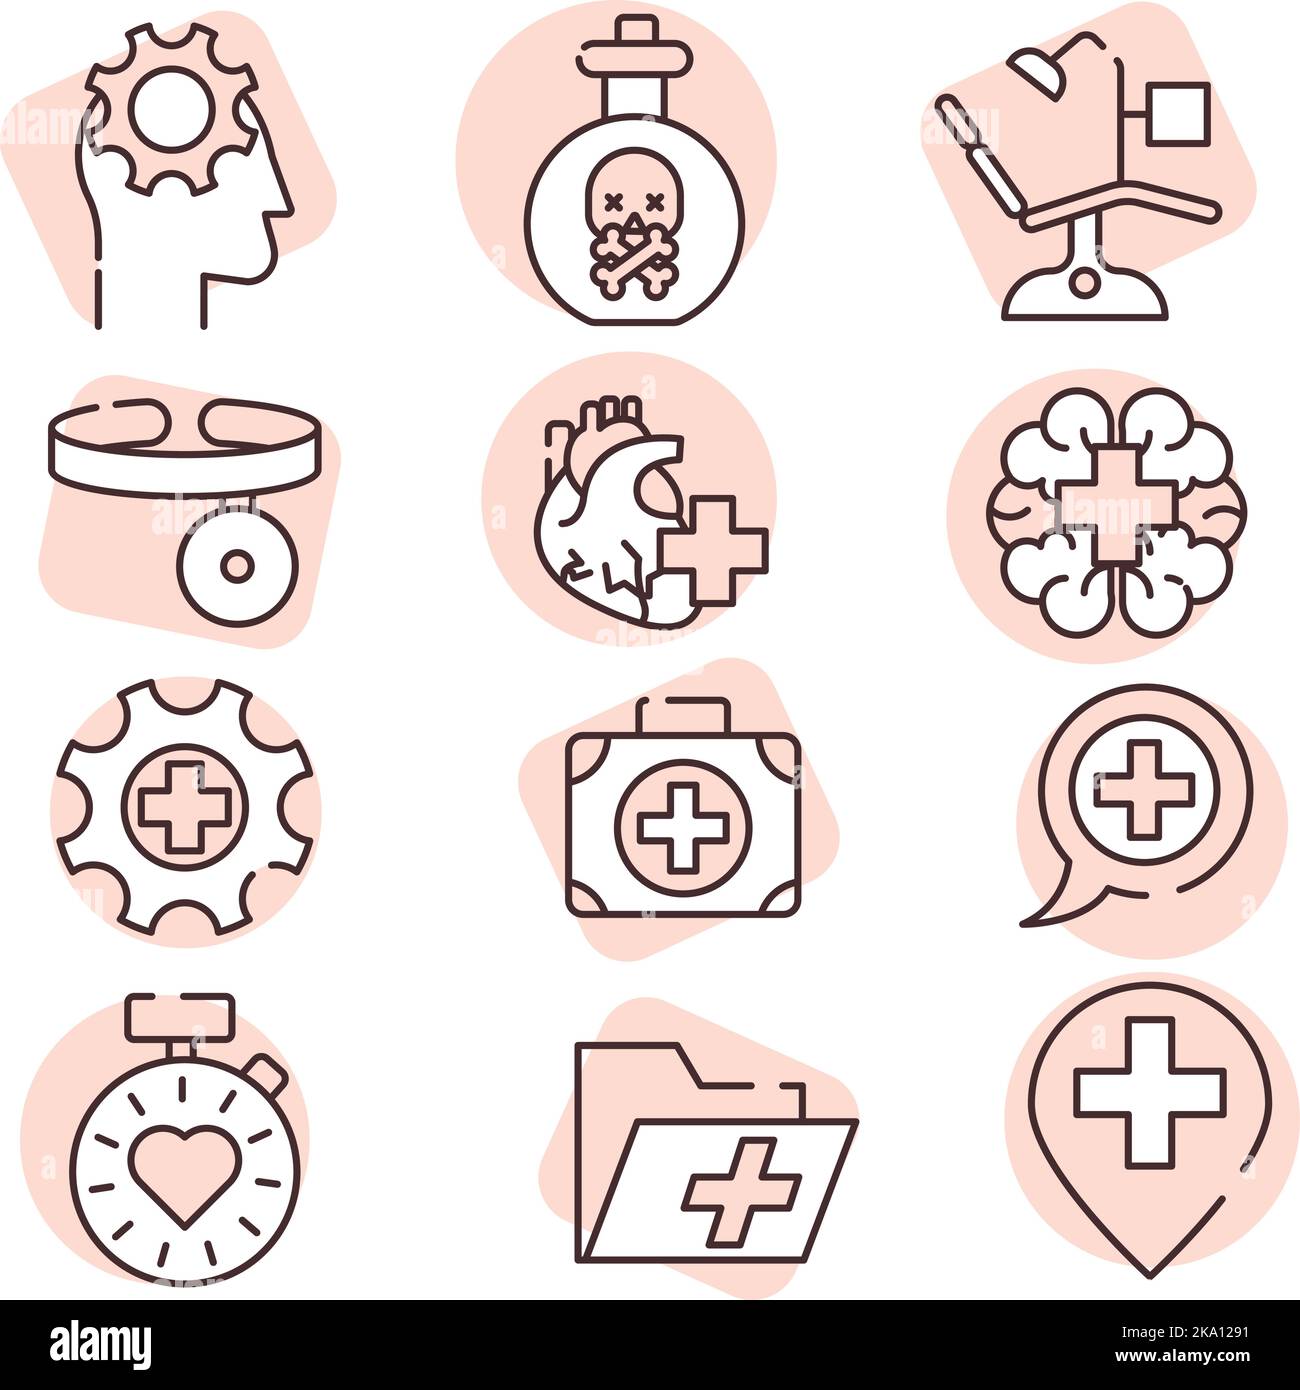 Medical business, illustration or icon, vector on white background. Stock Vector